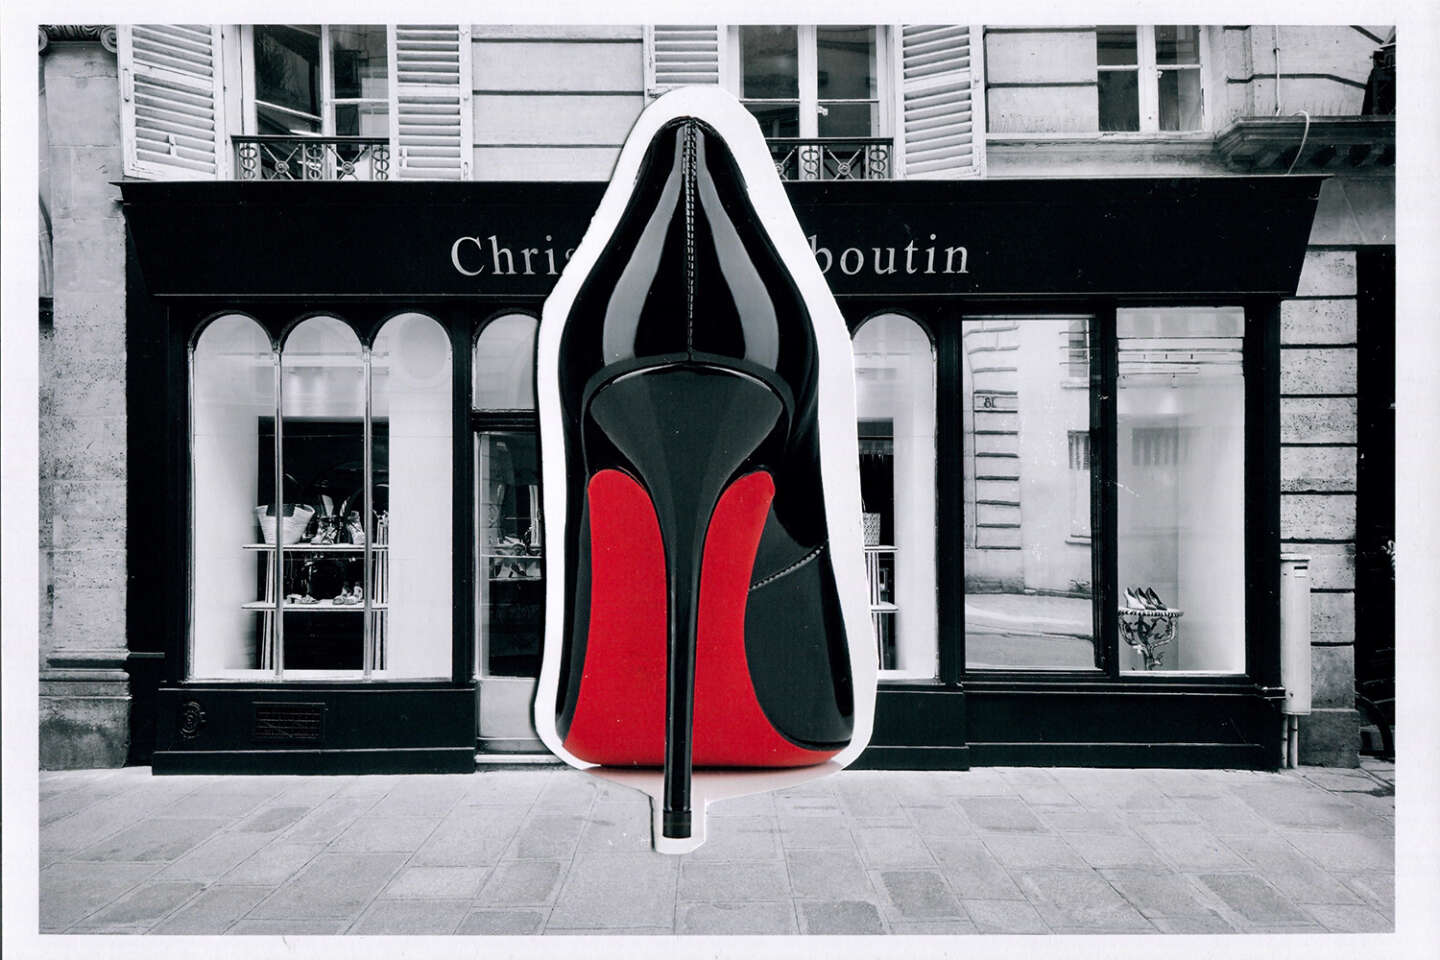 Shoe designer Louboutin defends right to red soles